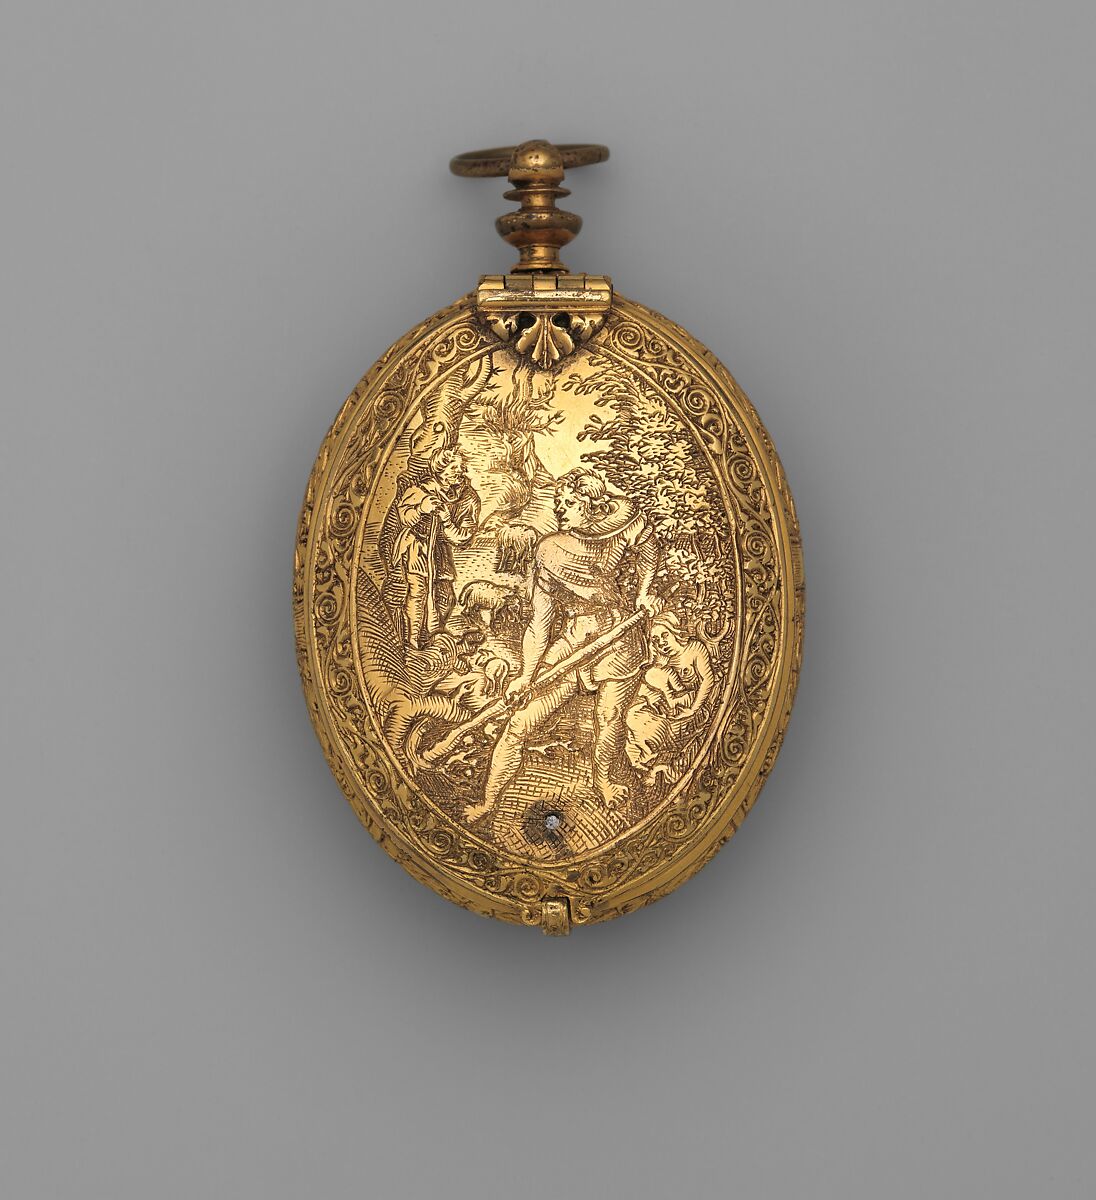 Watch, W.A., Case and dial: gilded brass; Movement: gilded brass and polished steel, Flemish, Antwerp or possibly Ghent